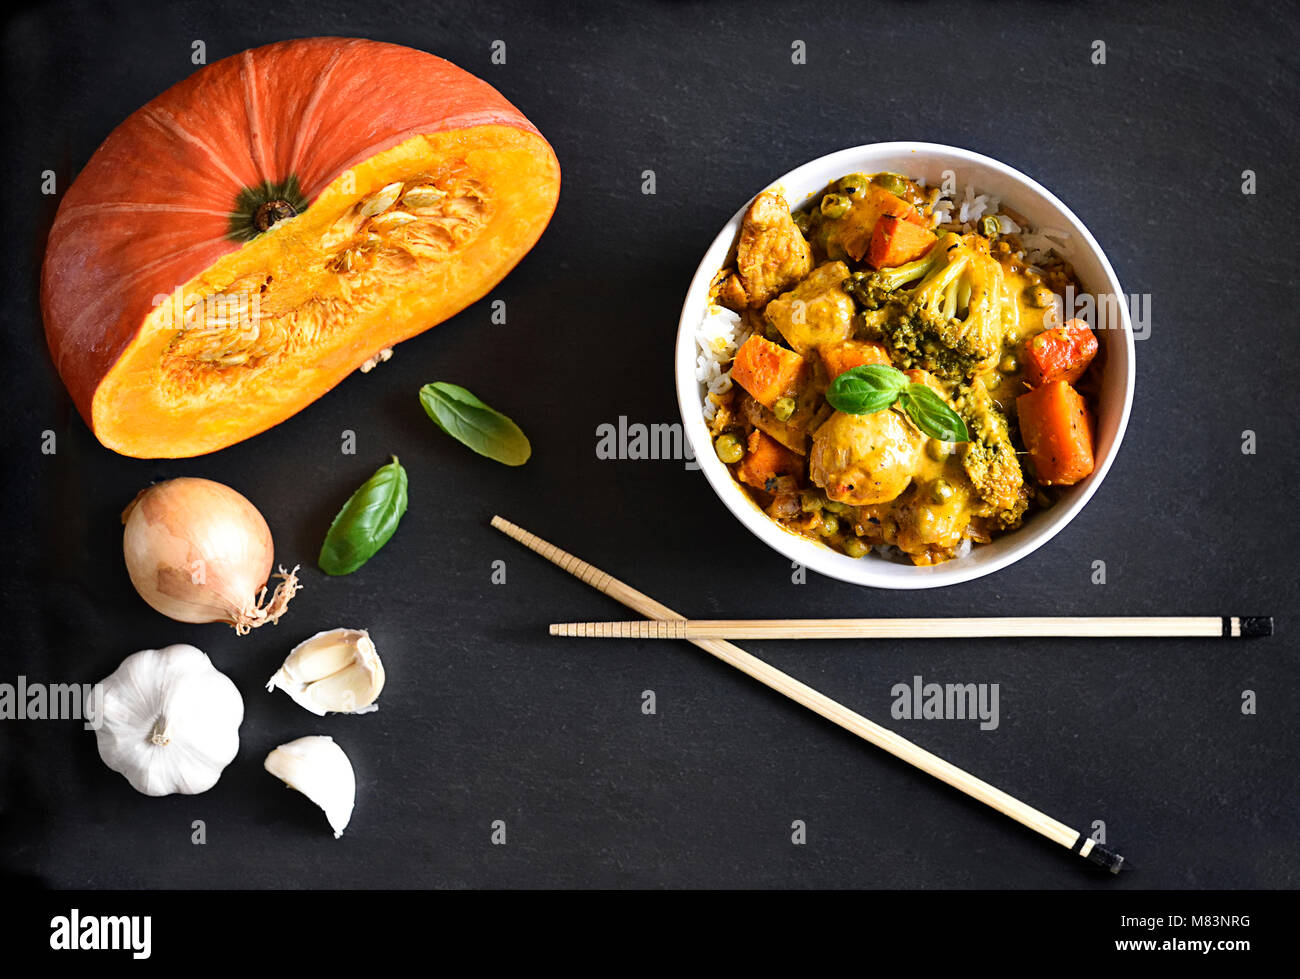 Thai curry or chicken curry. Meal in a white bowl, asian cuisine with chopsticks. high angle view. Stock Photo